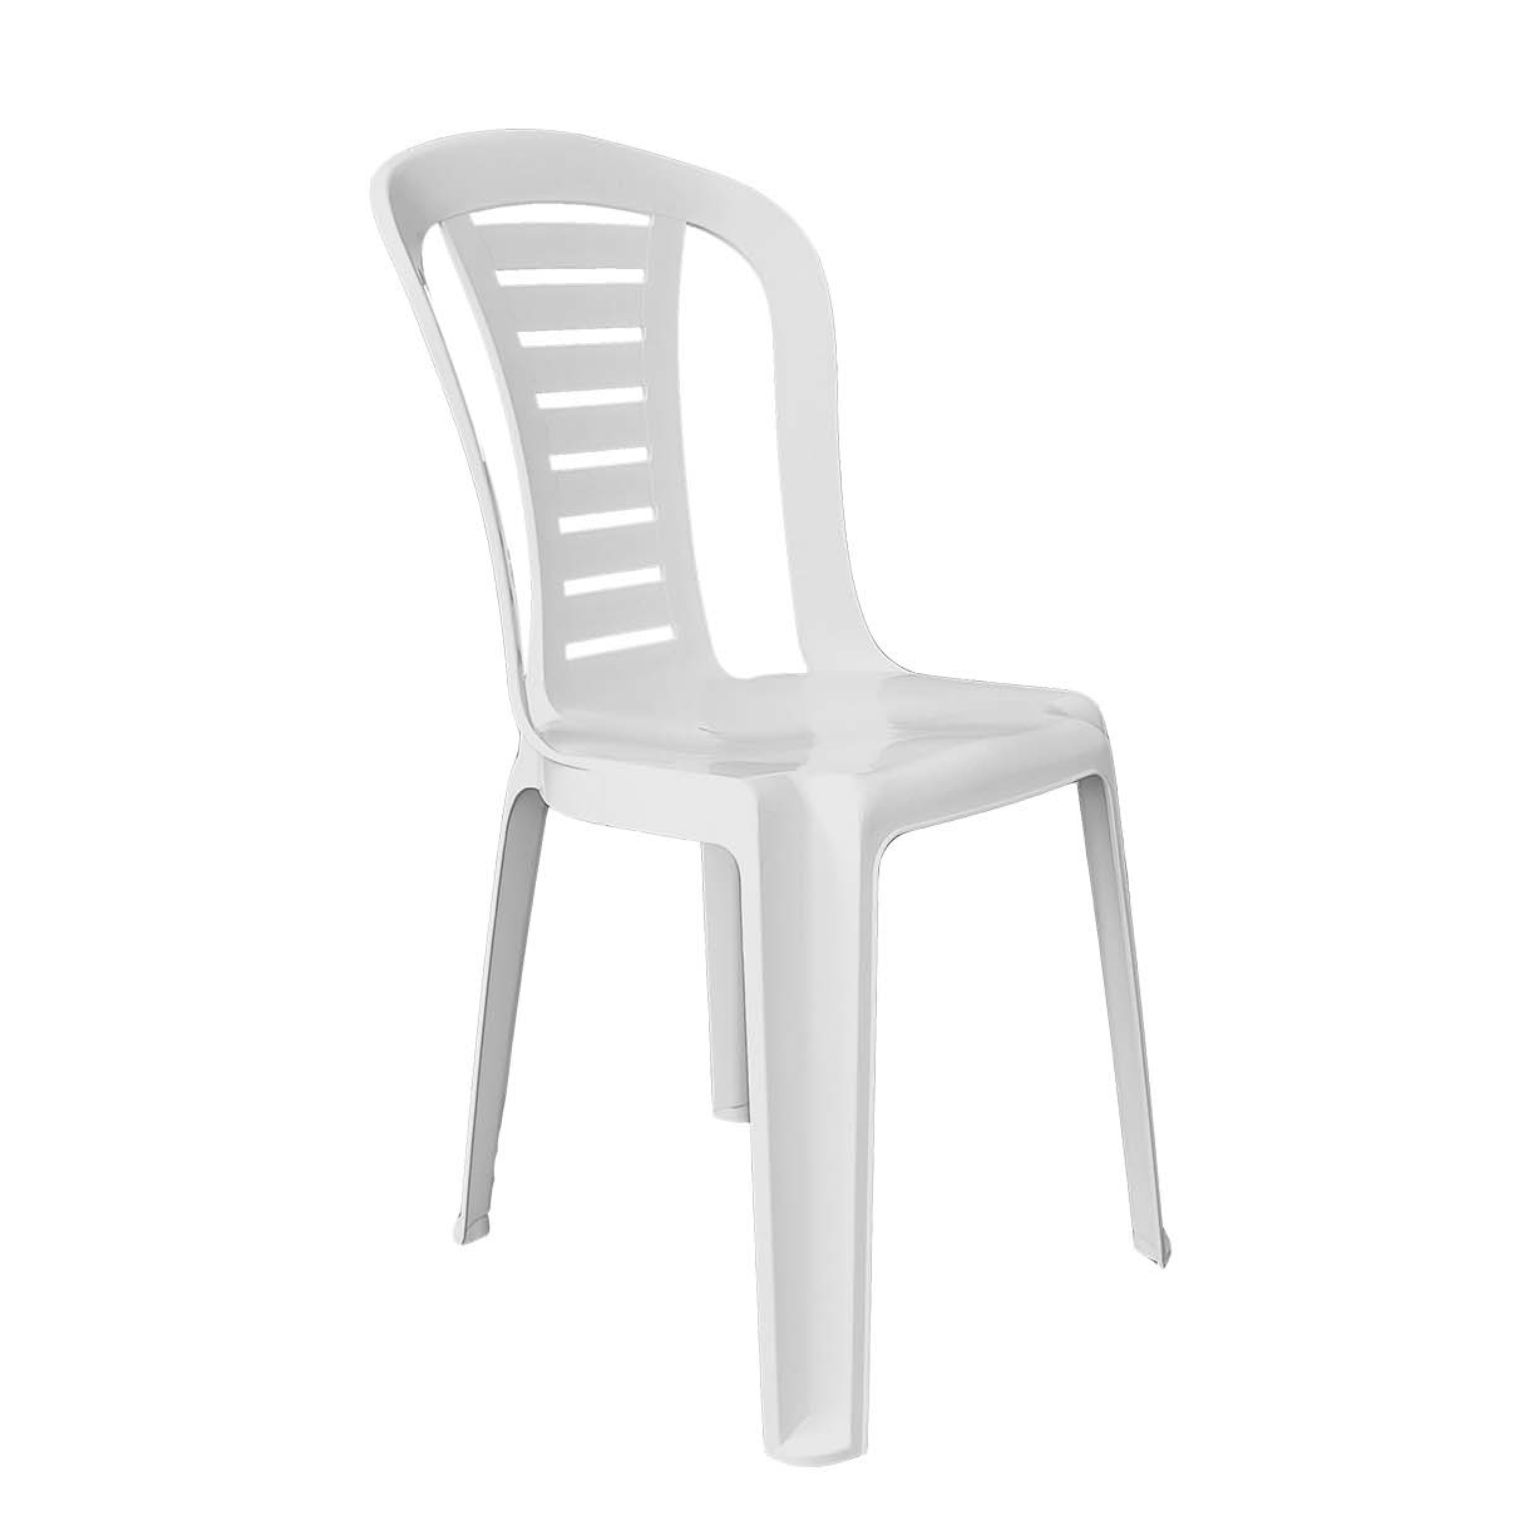 Stacking bistro chair - white